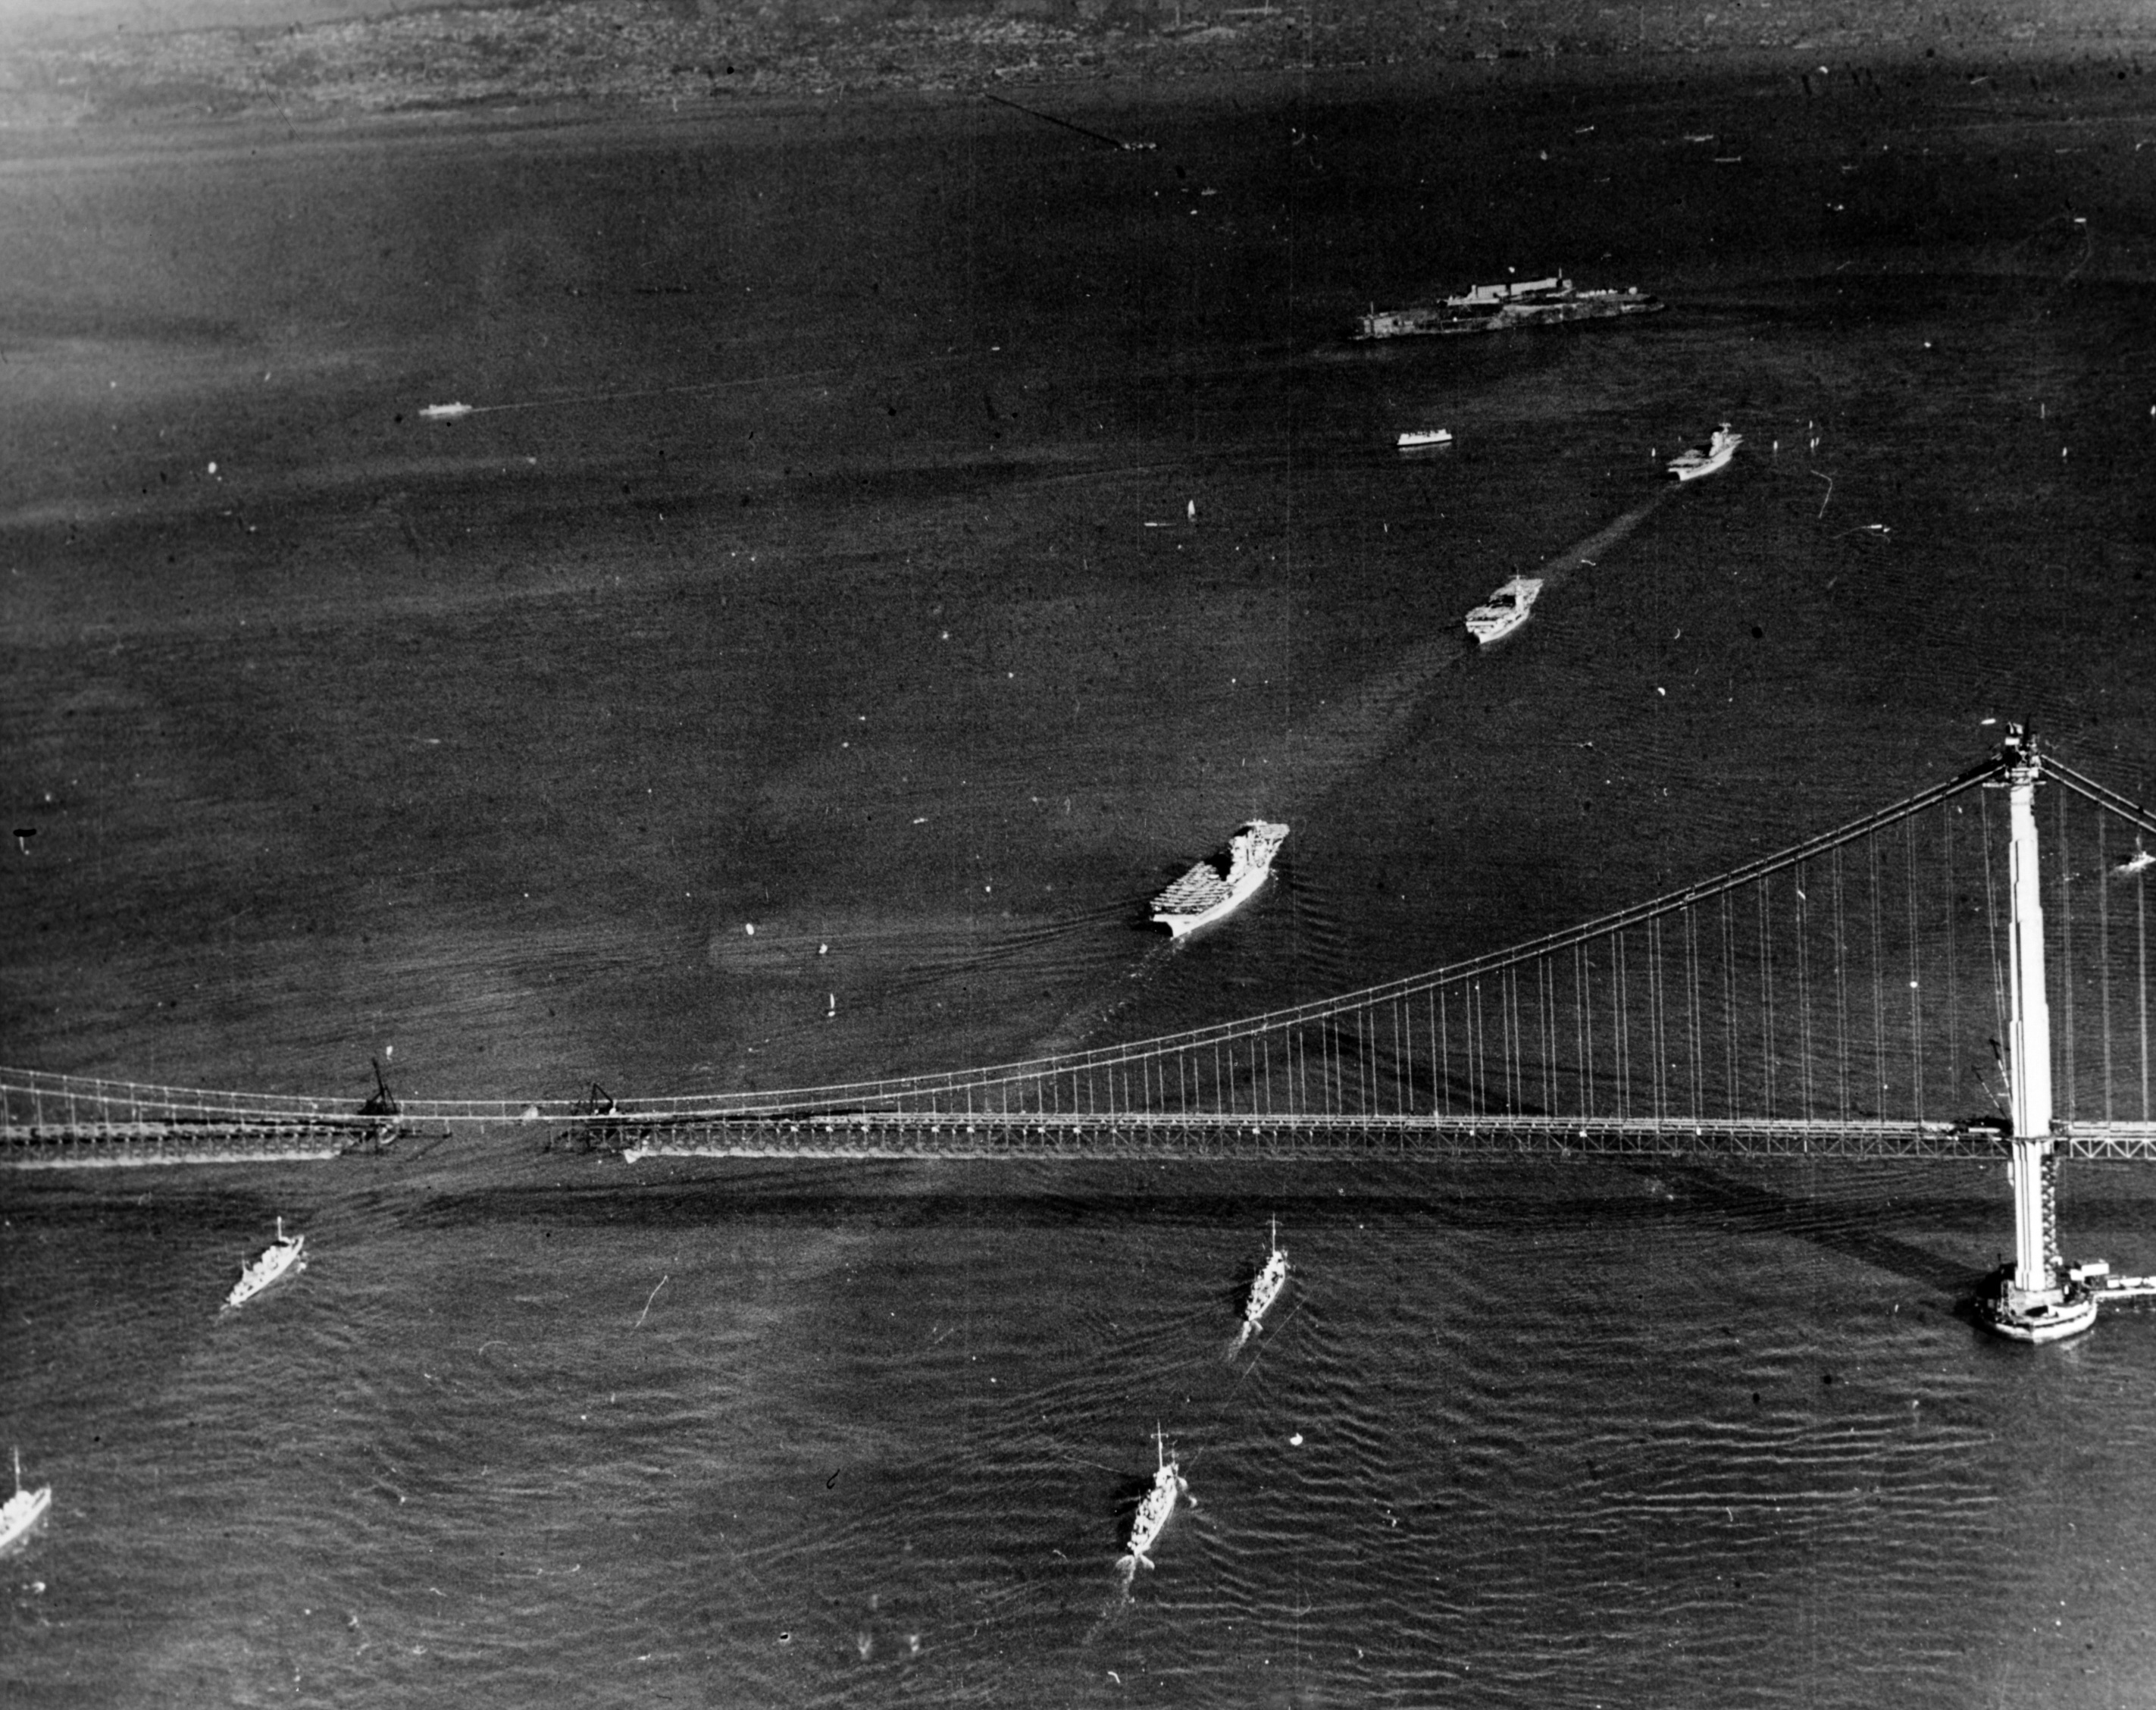 All three of the United States’ aircraft carriers entering San Francisco Bay in column, USS Lexington (Lexington-class) is followed by USS Ranger which is followed by USS Saratoga, 12 Nov 1936. 